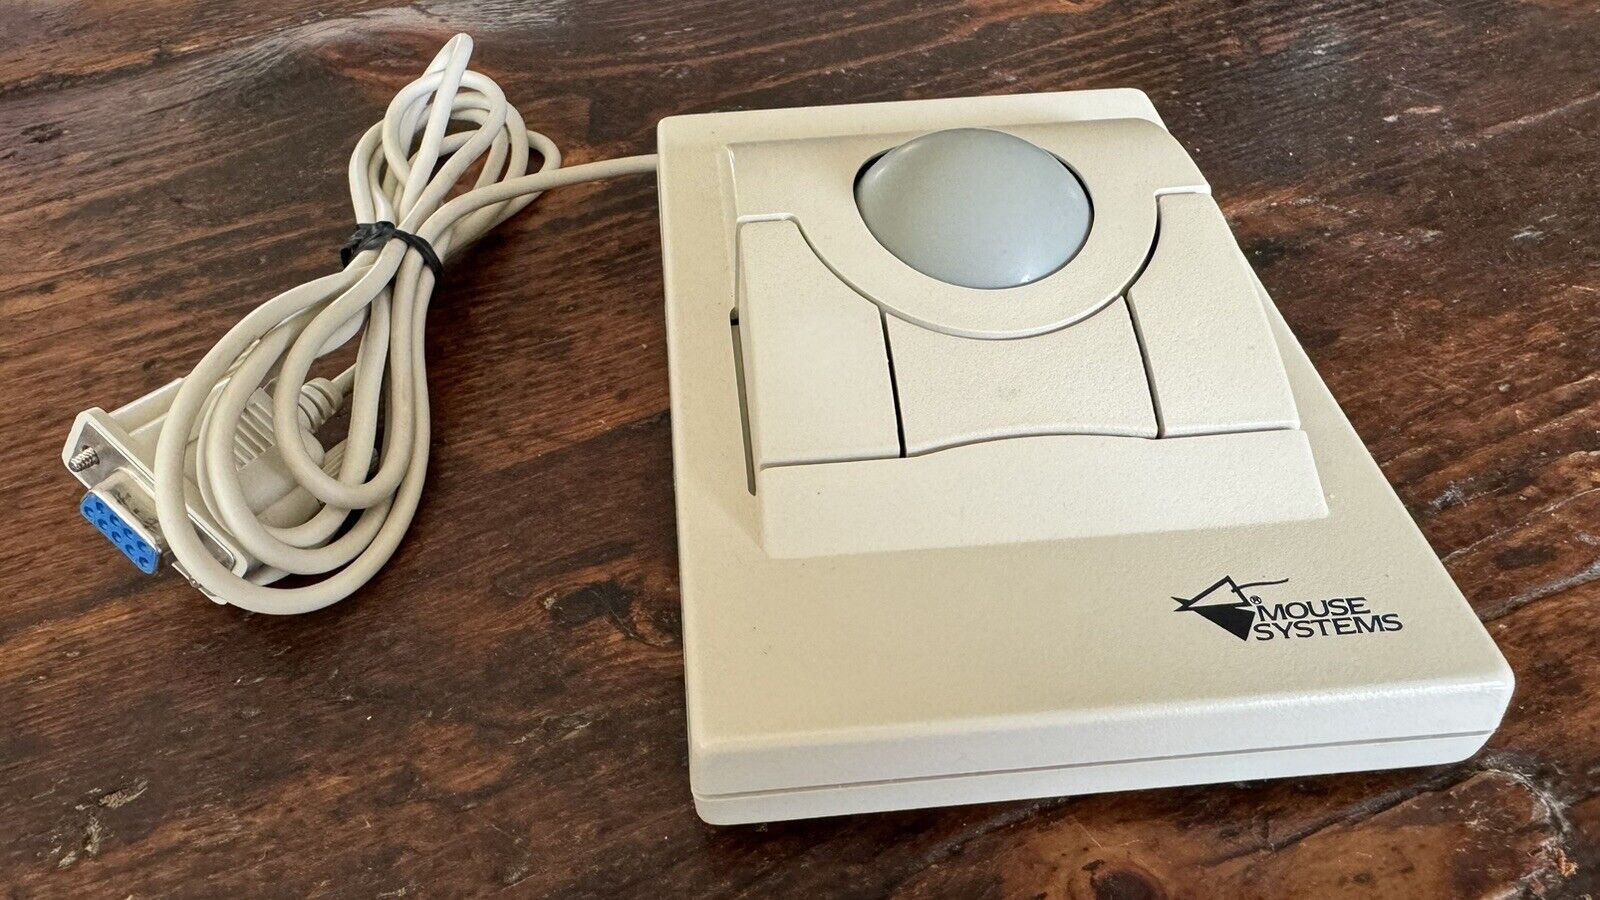 Vintage Mouse Systems Trackball PC Computer 9-pin 402569-001 3 Button Track Ball